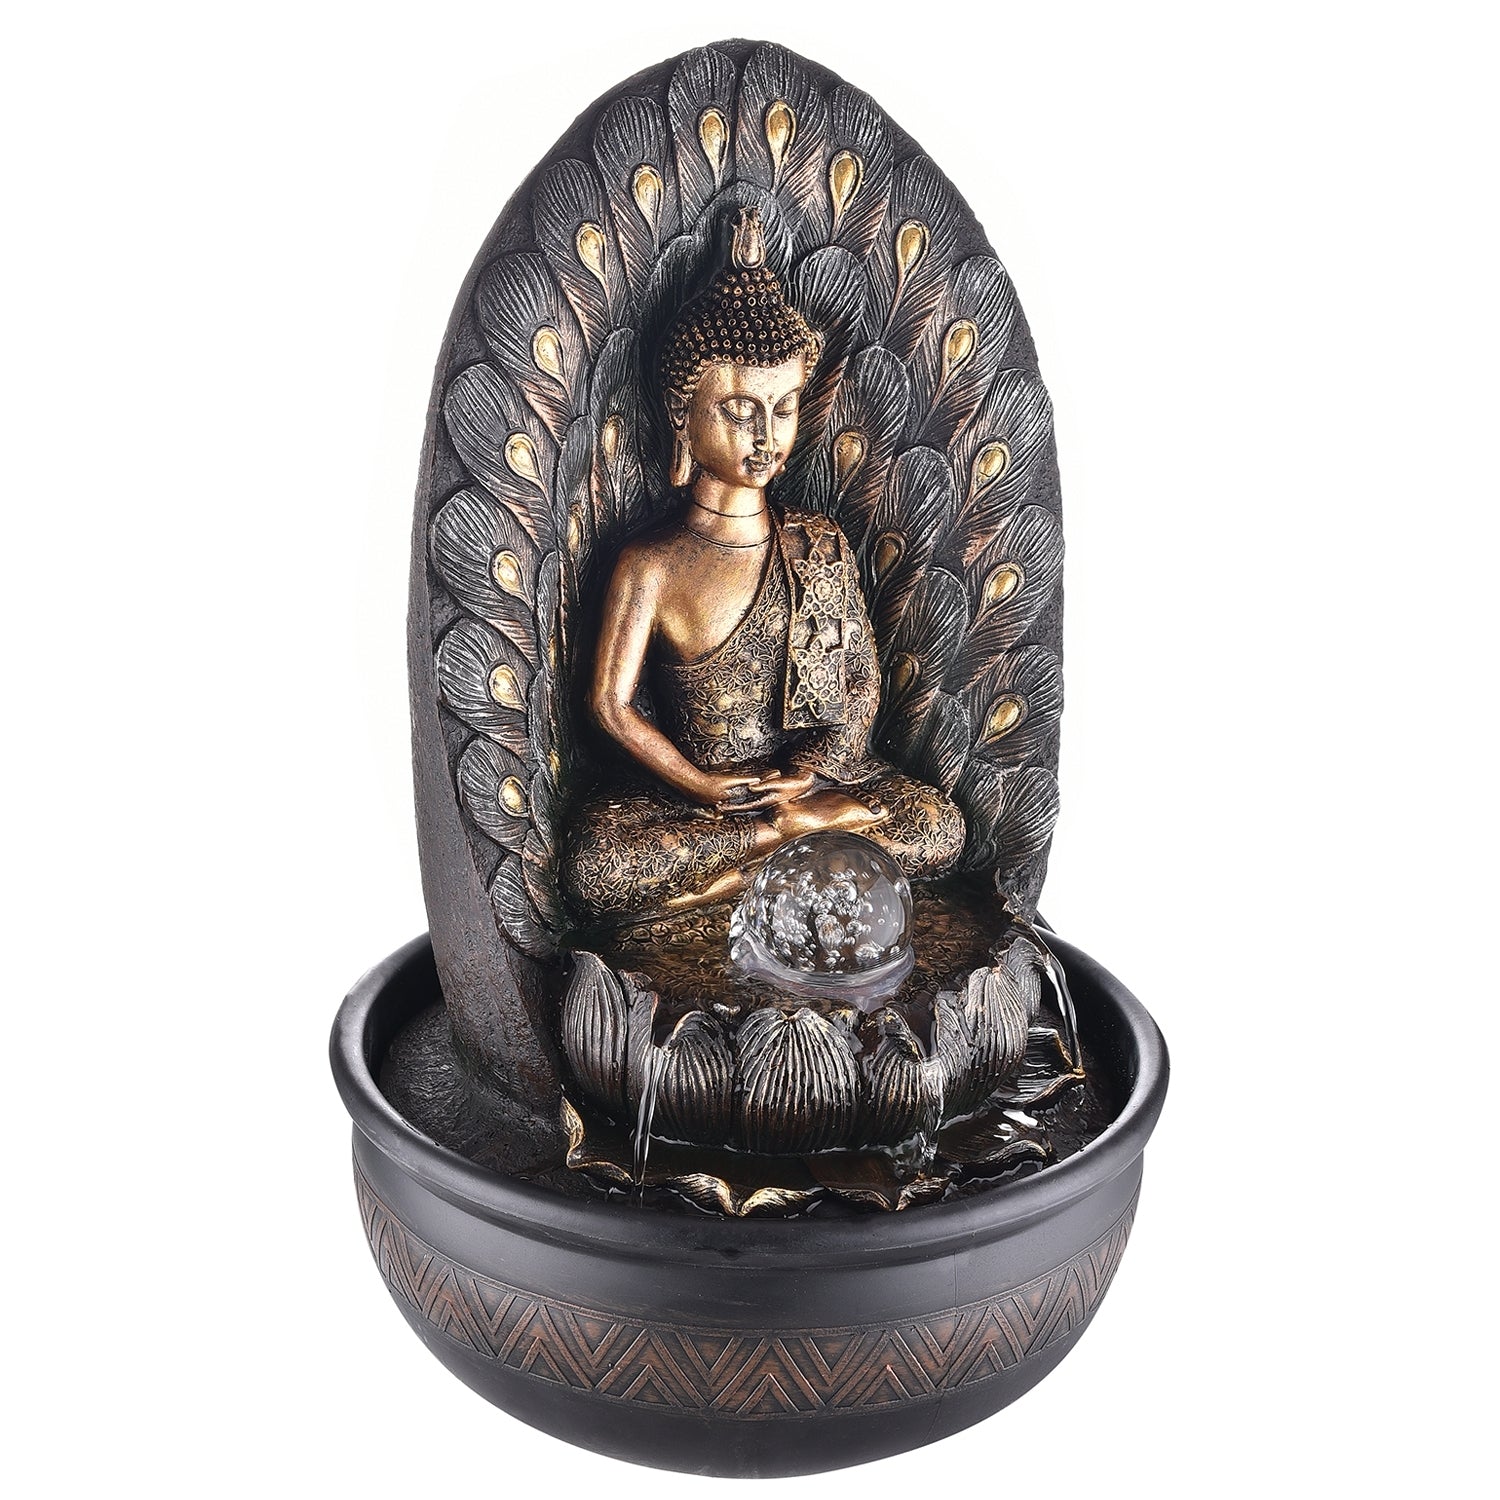 Polystone Leaf Textured Brown and Golden Meditating Buddha Idol Water Fountain With Crystal Ball for Home/Office Decor 3